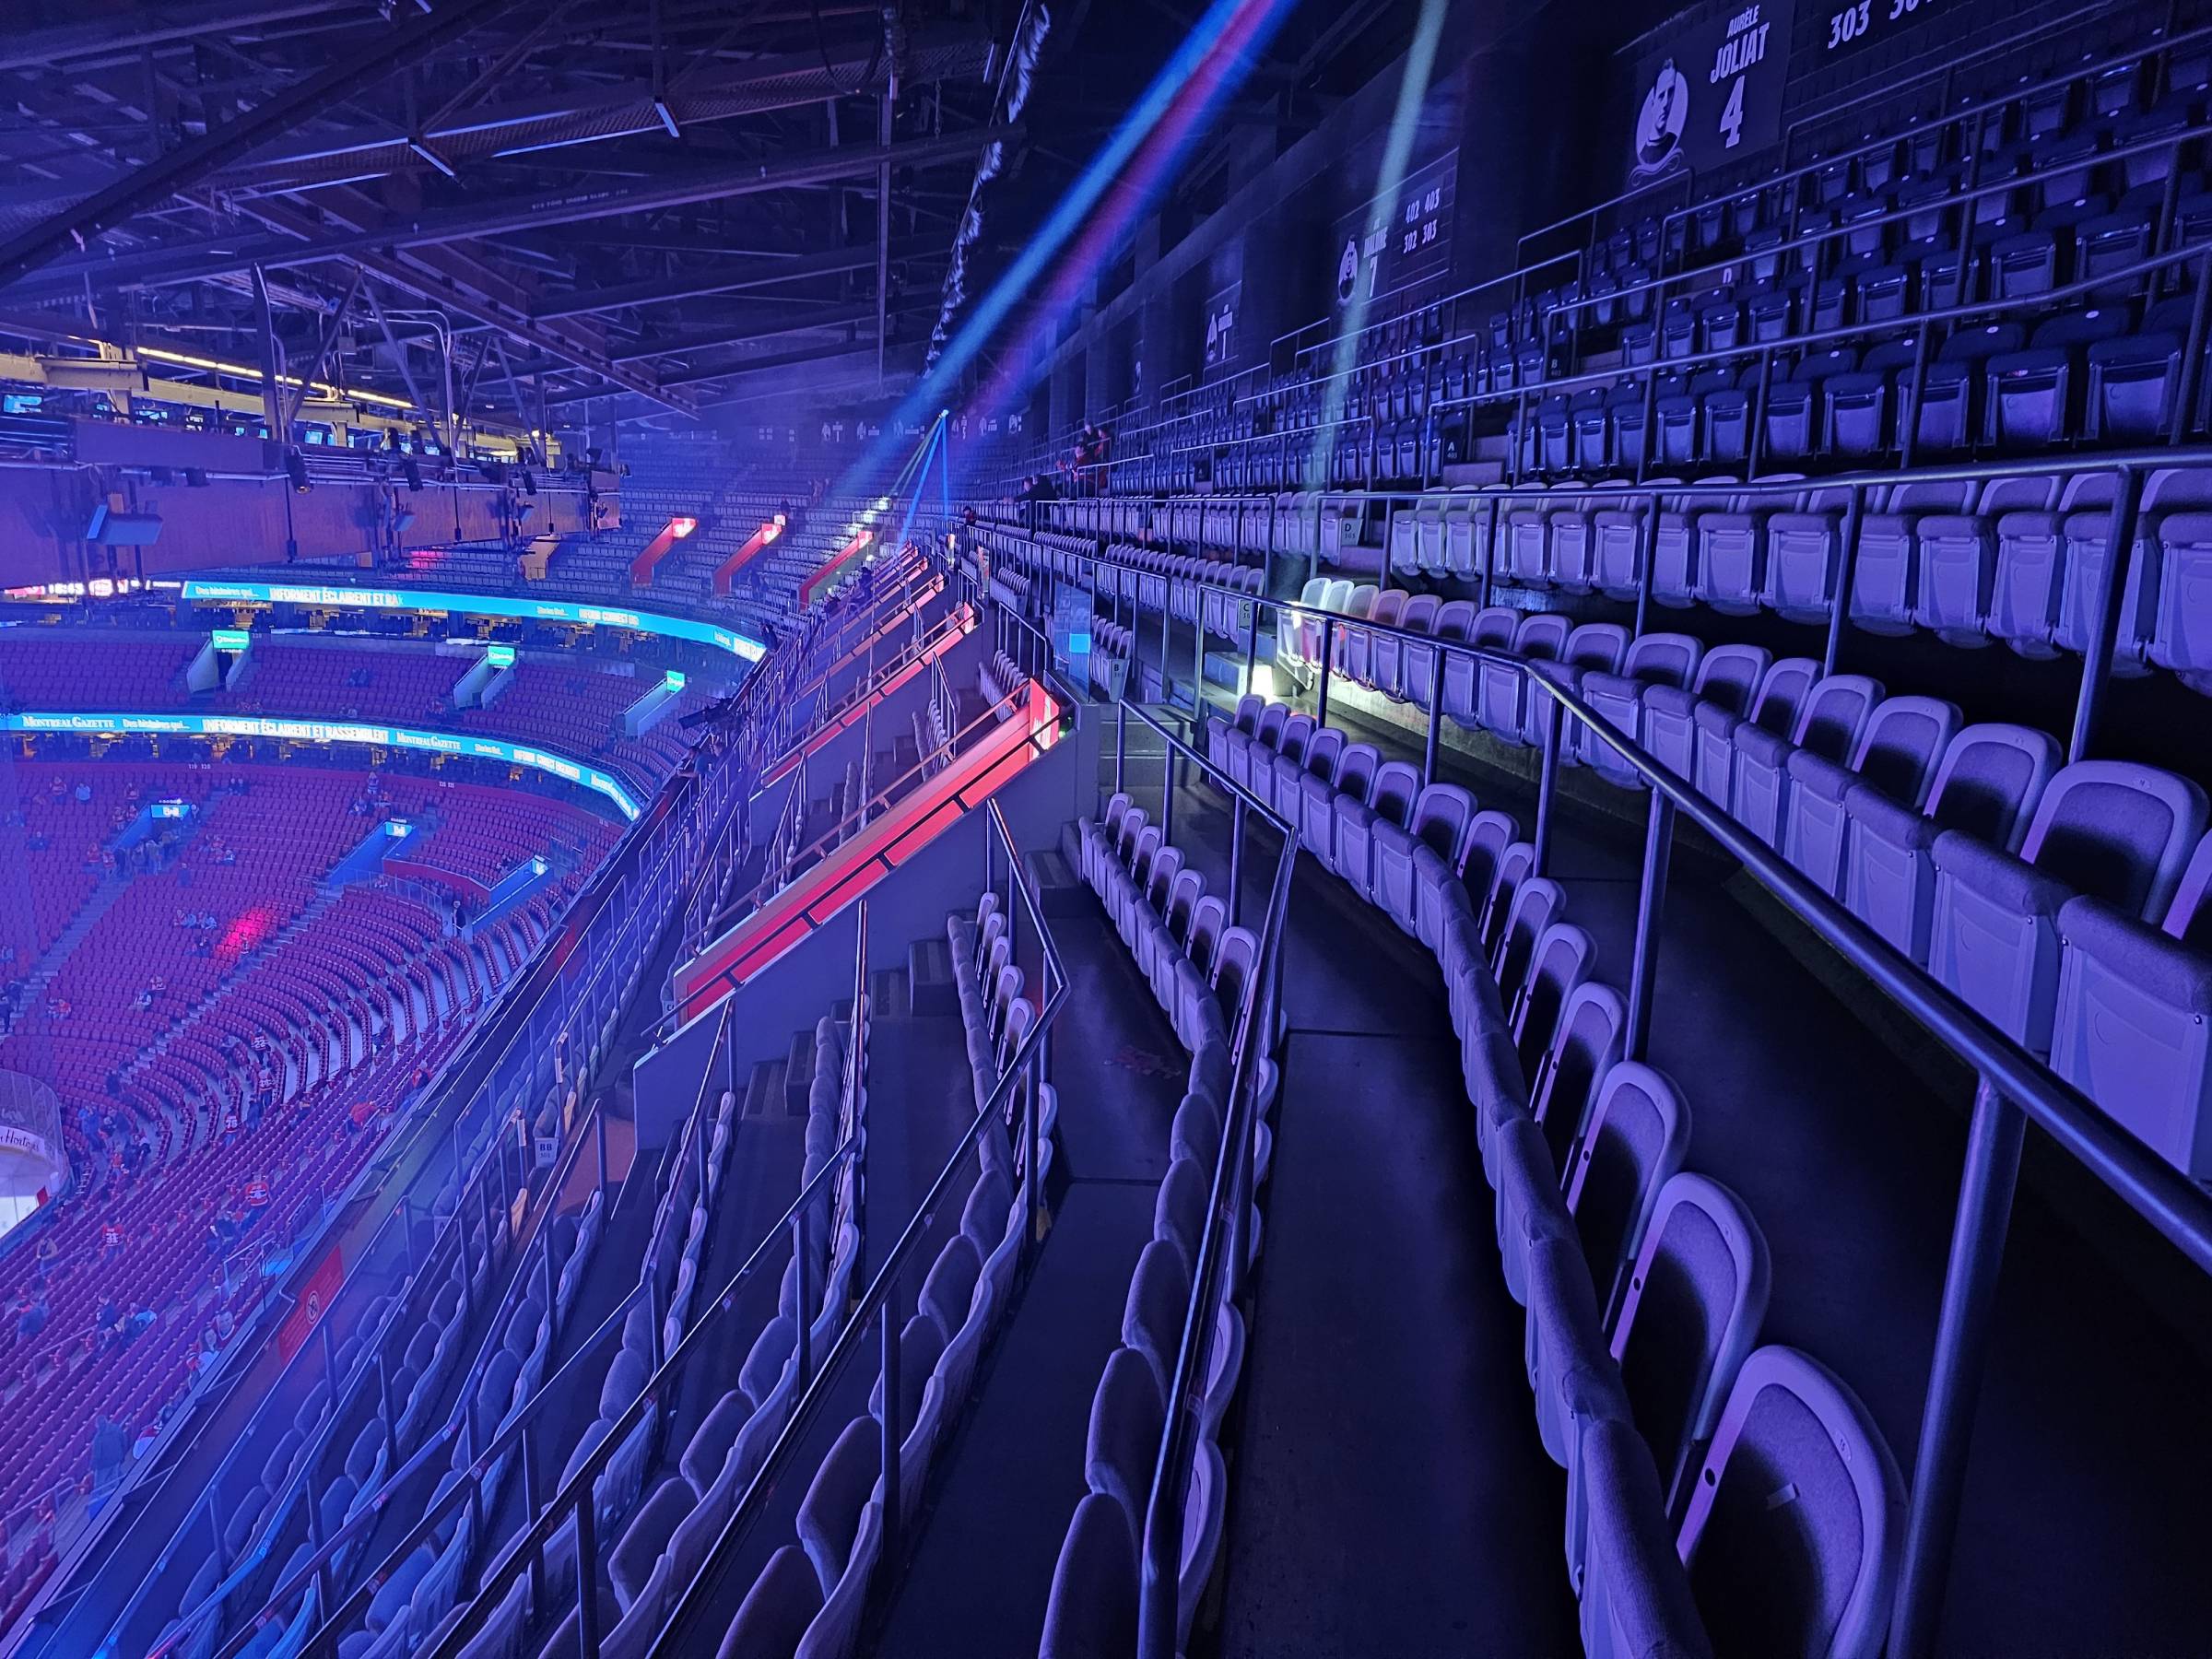 300 Level Seating at the Bell Centre